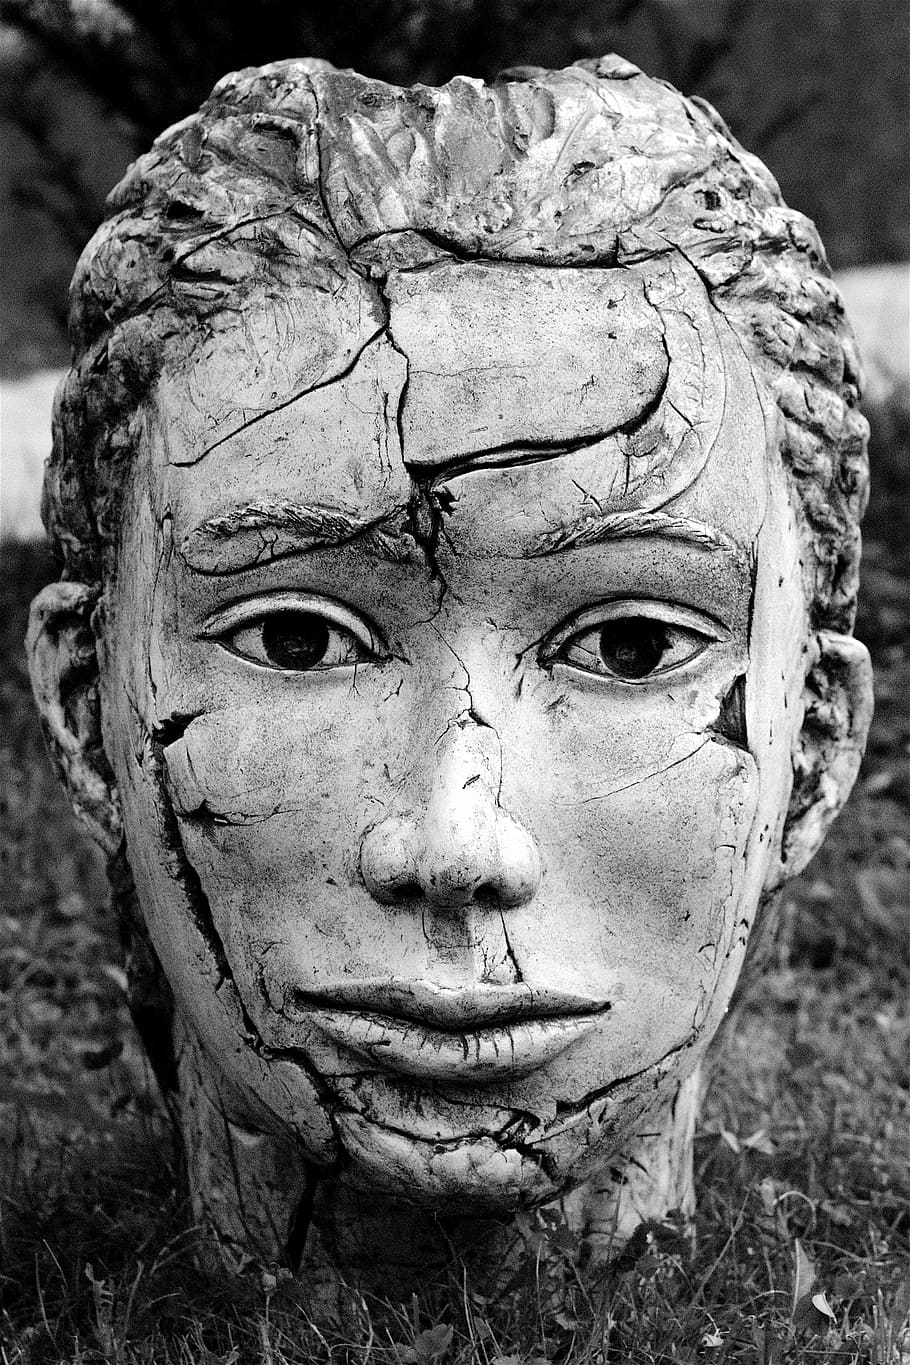 grayscale photography of cracked head bust on ground, mouth, eyes, HD wallpaper